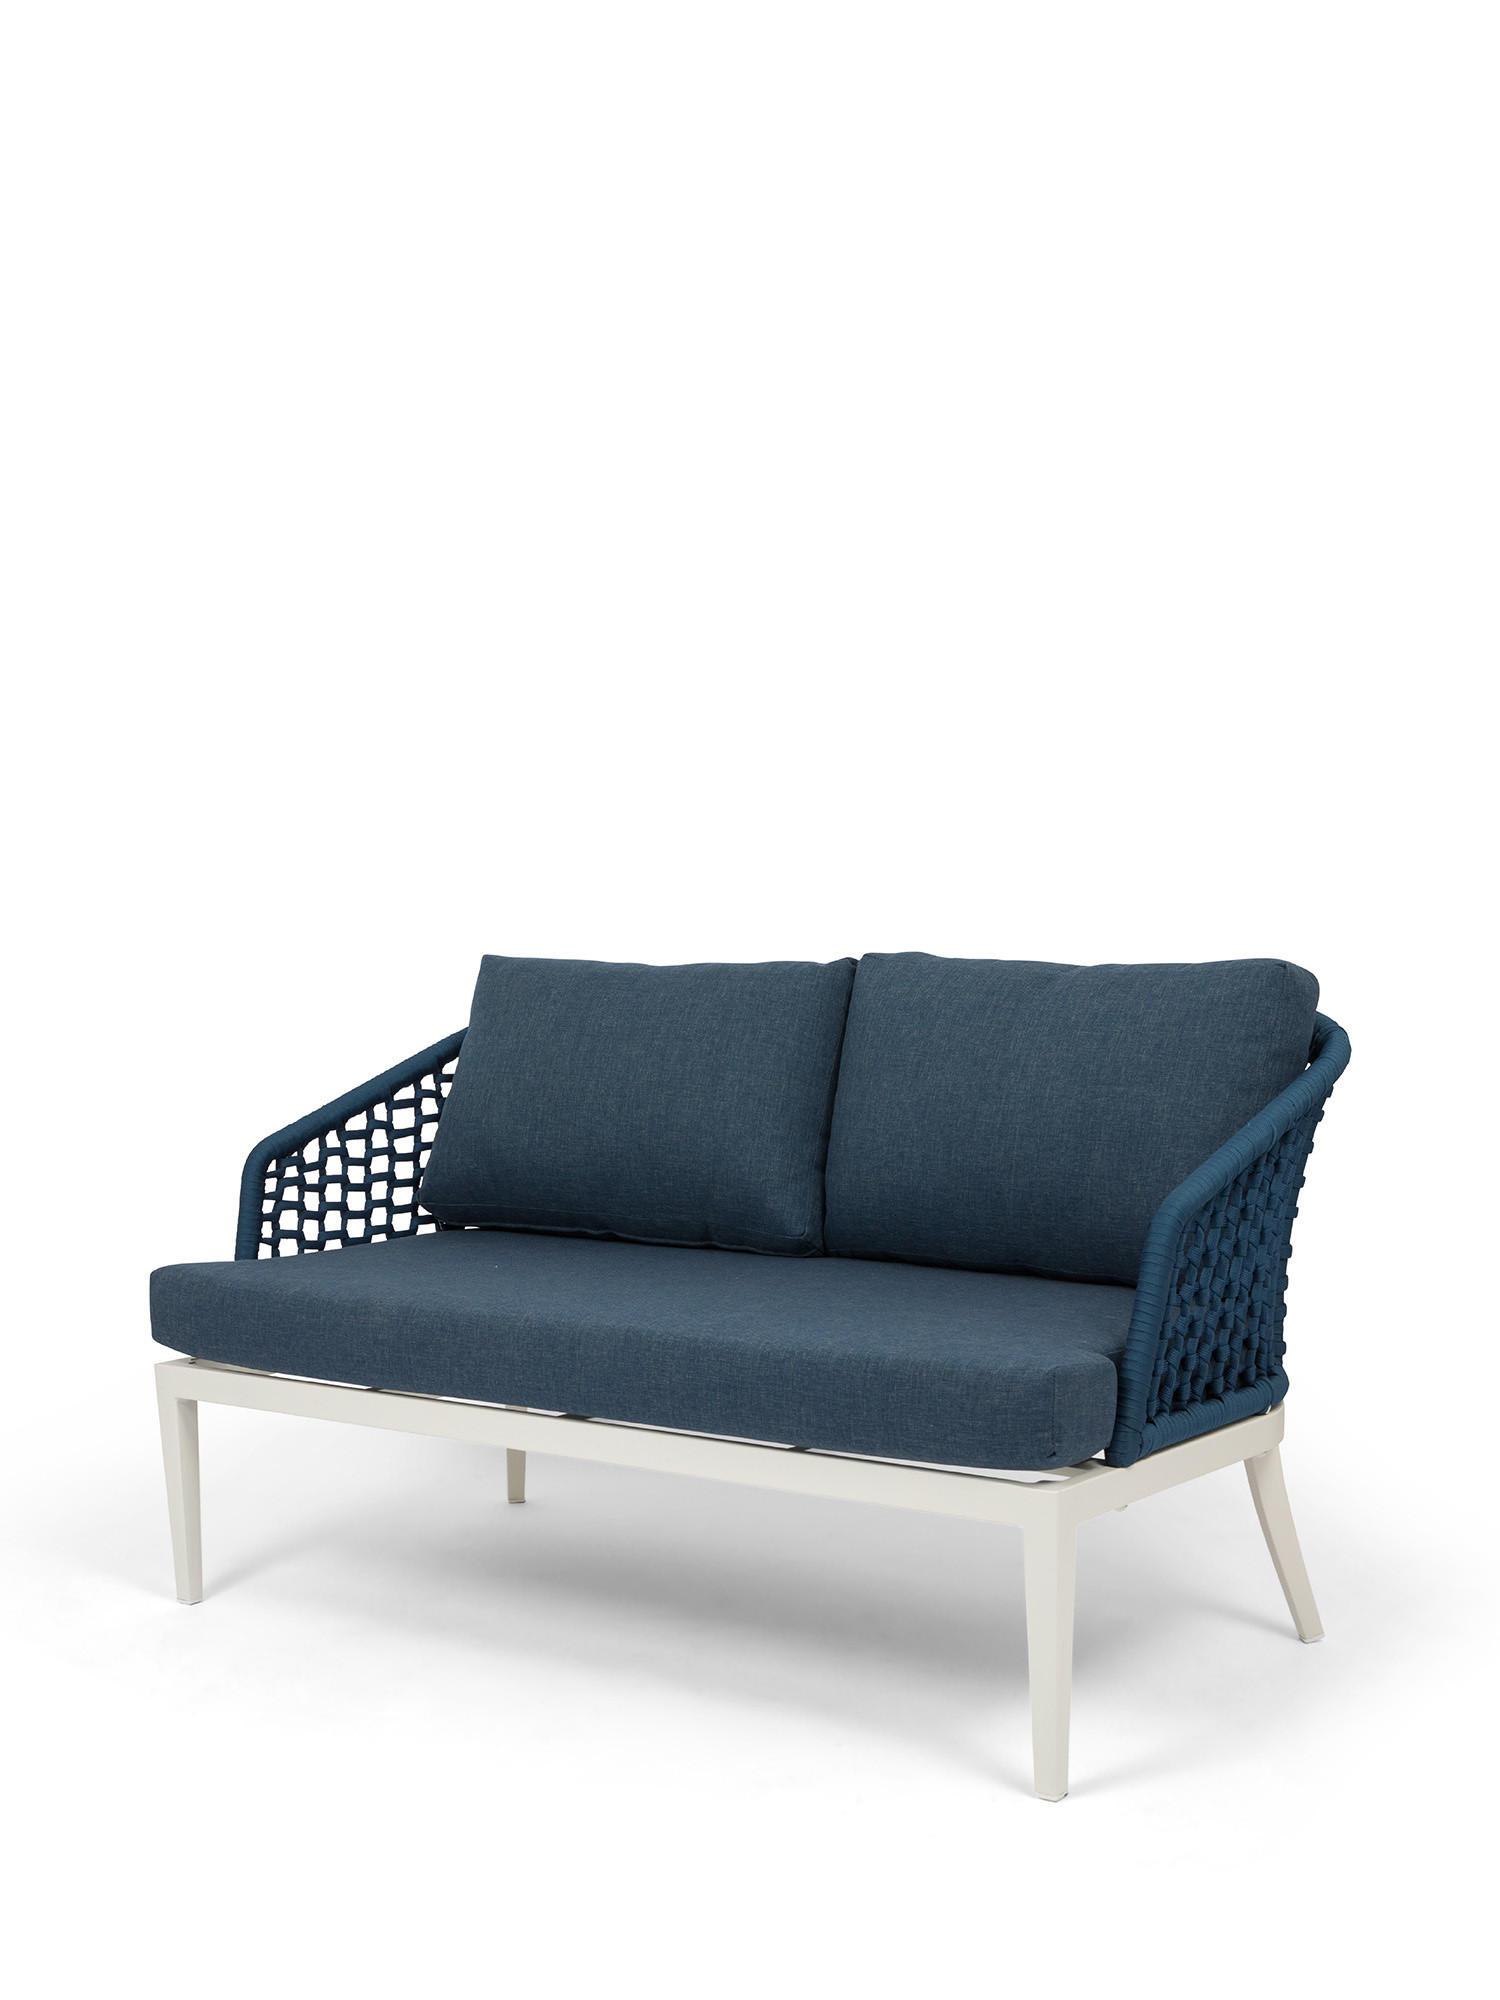 Mediterranean 2-seater sofa in polyester and aluminium, Blue, large image number 0